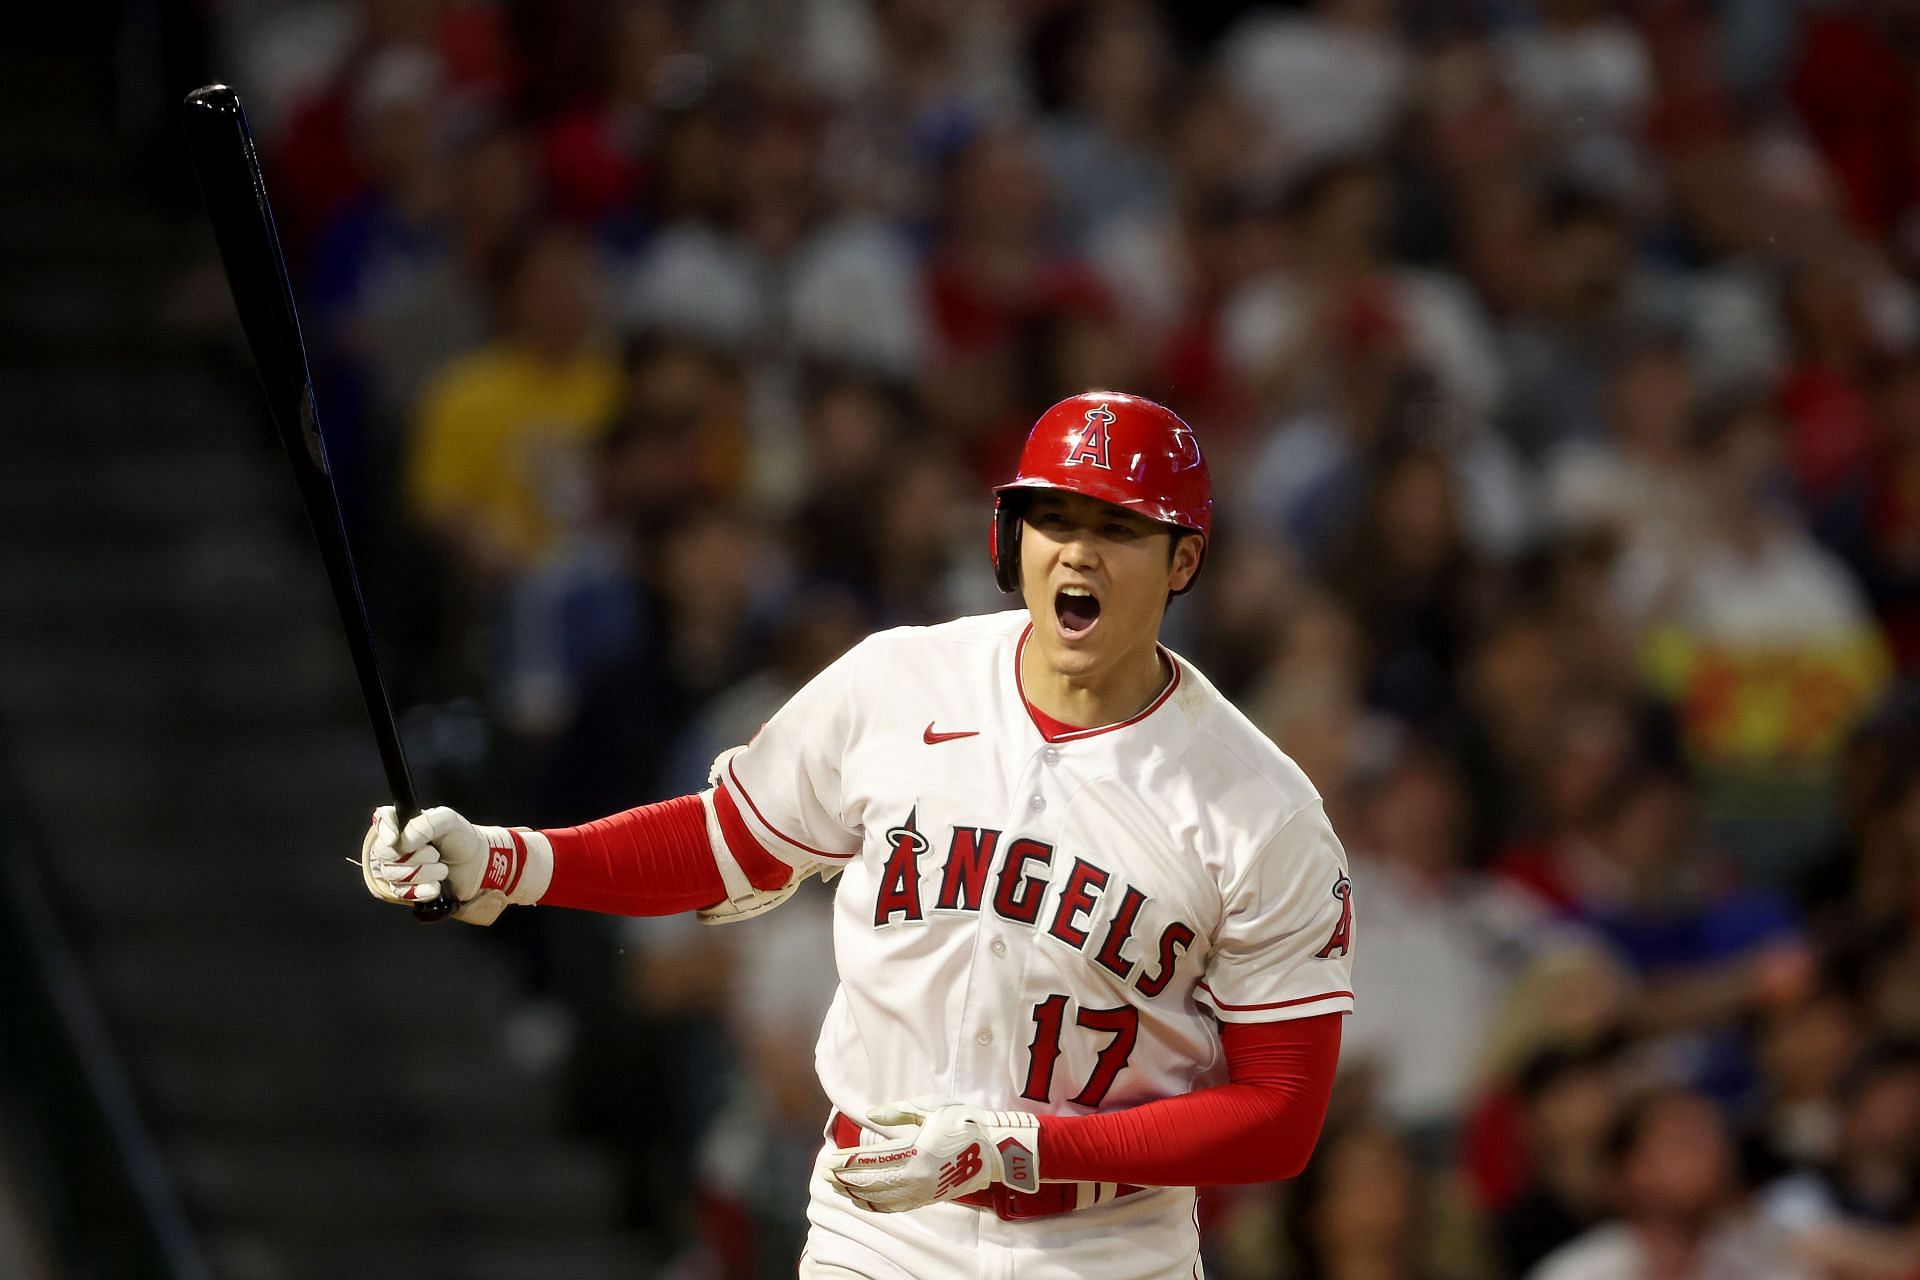 Shohei Ohtani of the Los Angeles Angels reacts after flying out against the Los Angeles Dodgers at Angel Stadium of Anaheim